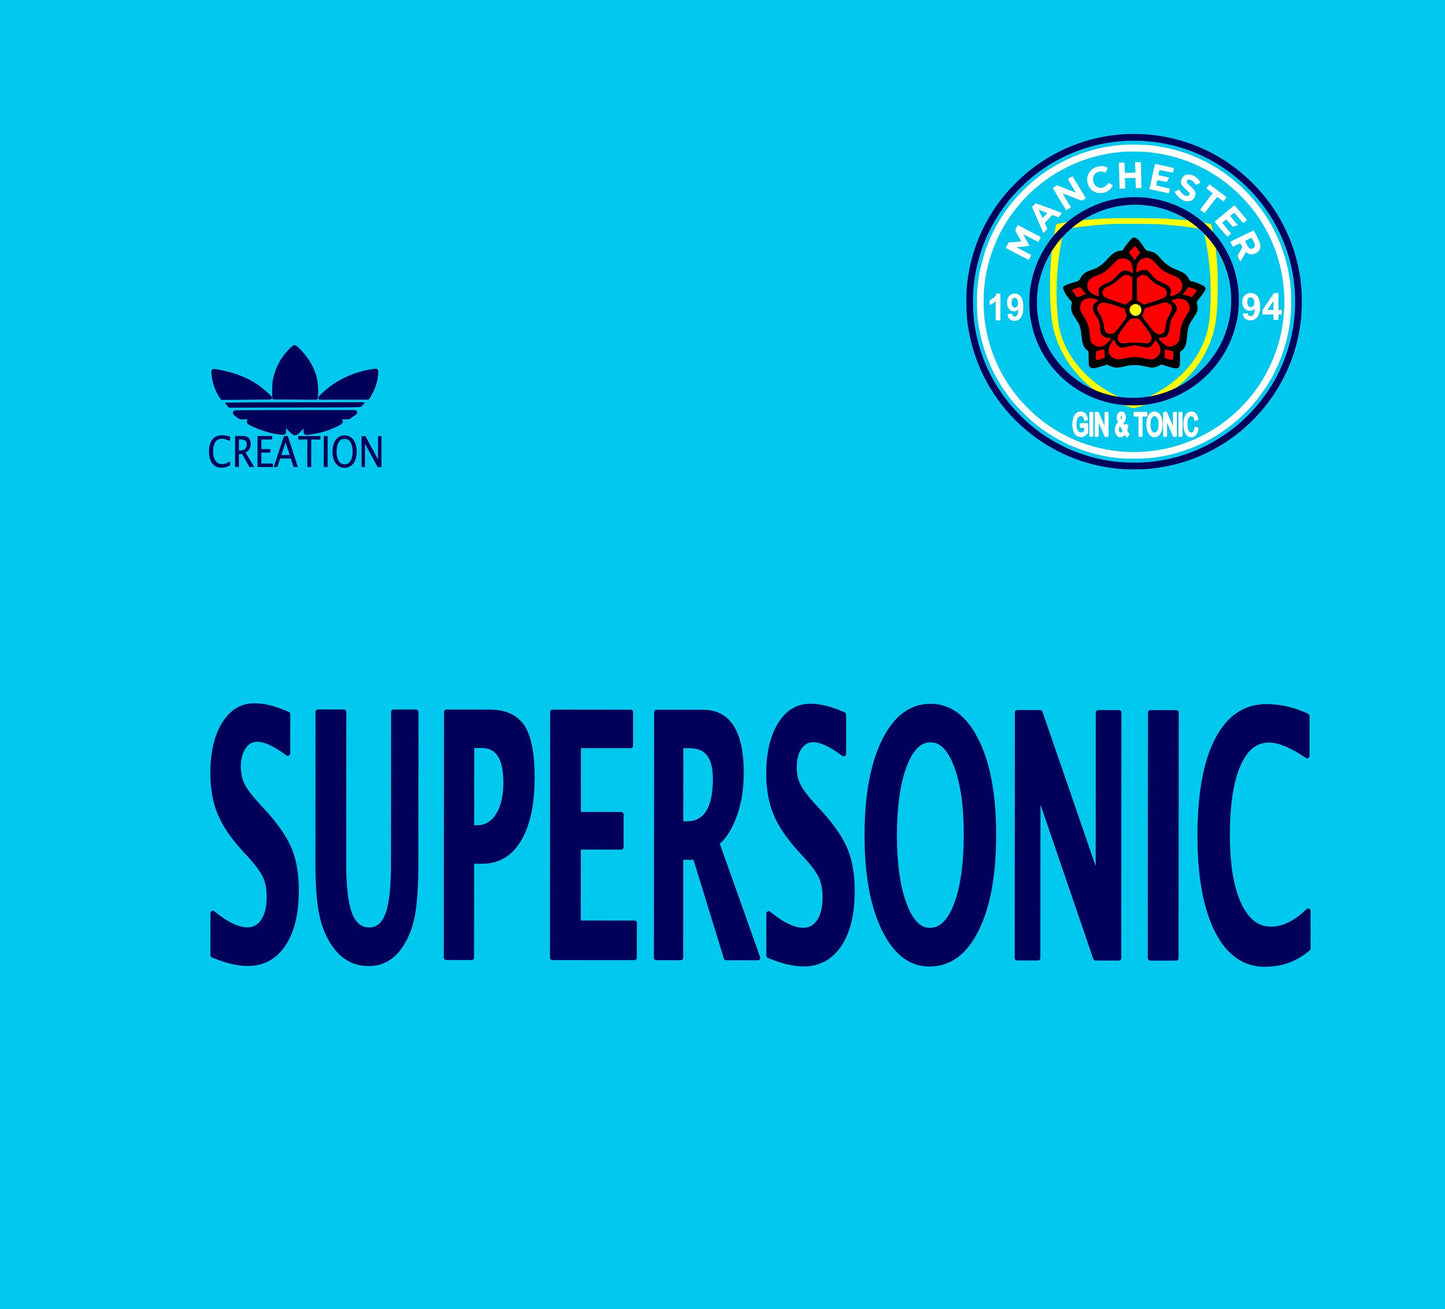 SUPERSONIC: Sweatshirt Inspired by Oasis & Football. - SOUND IS COLOUR